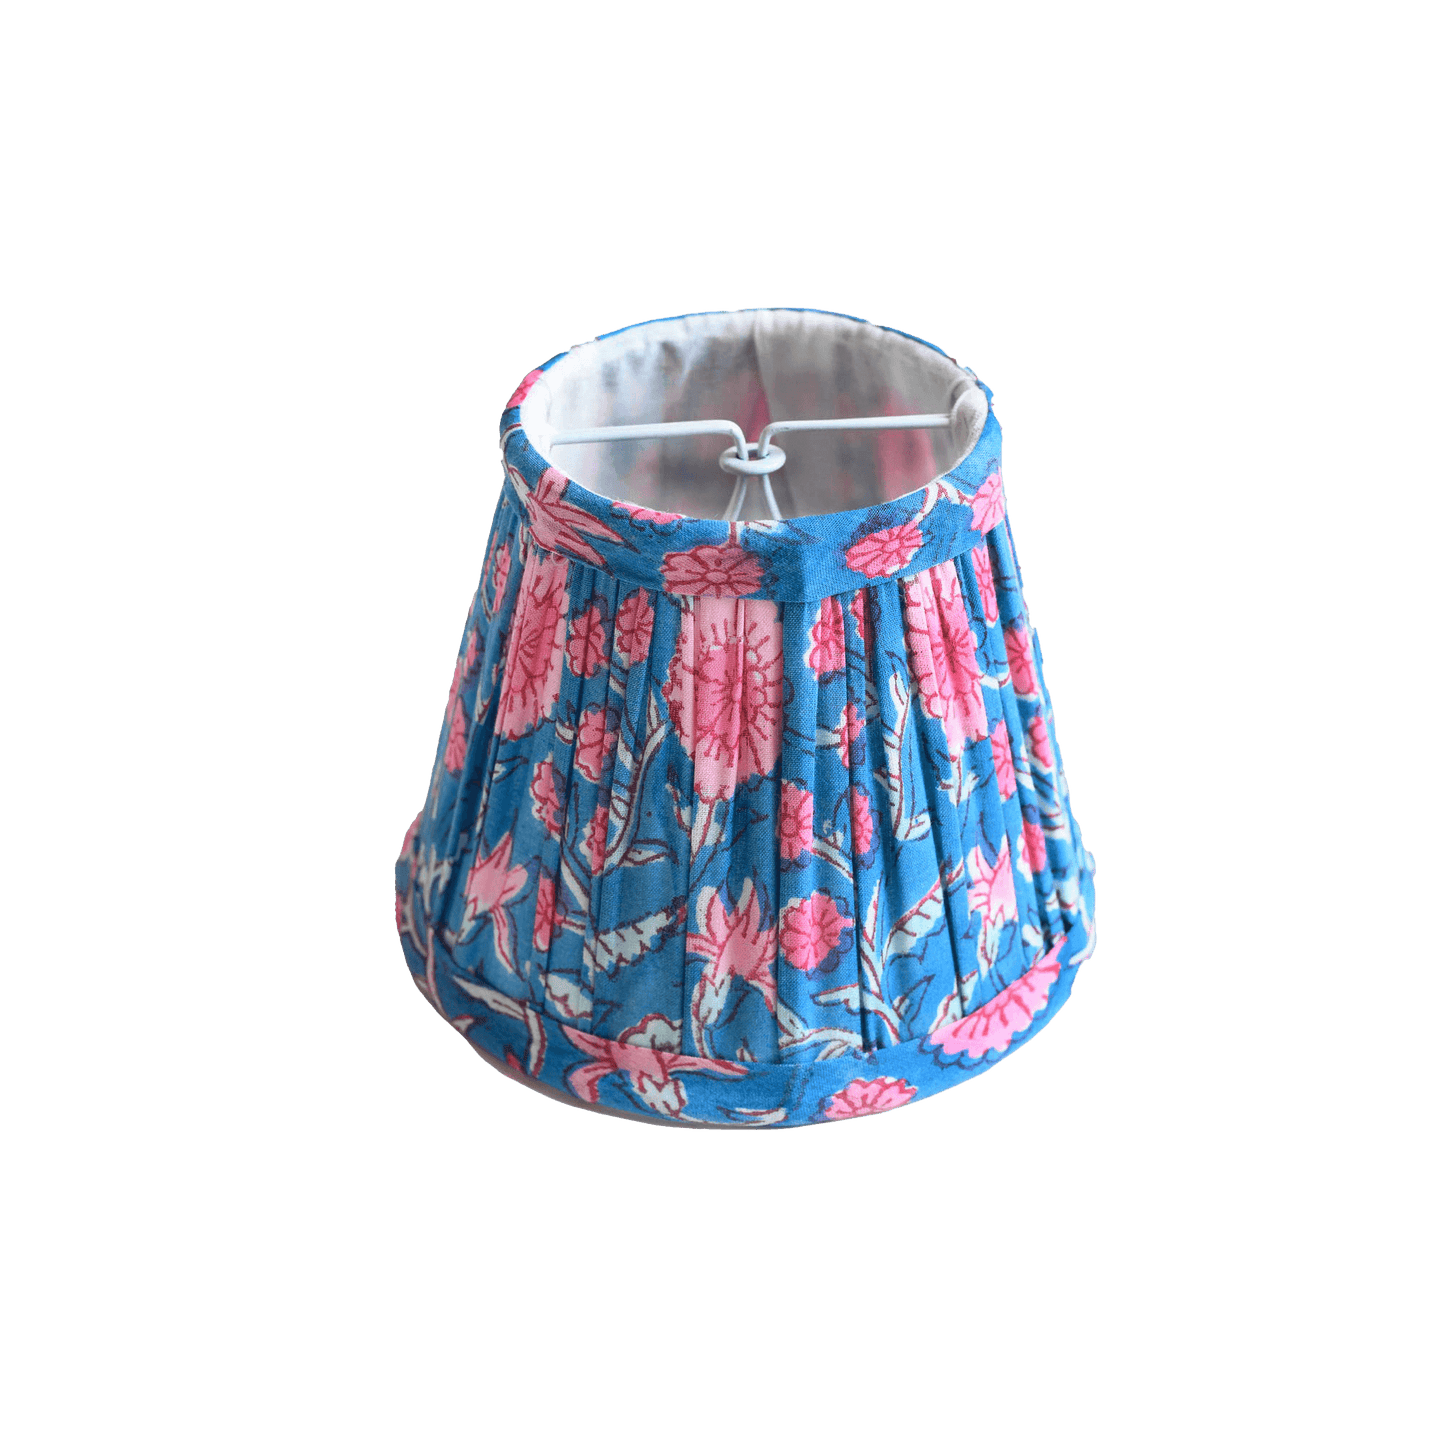 Hand block printed organic cotton pleated chandelier lampshade in blue and pink.